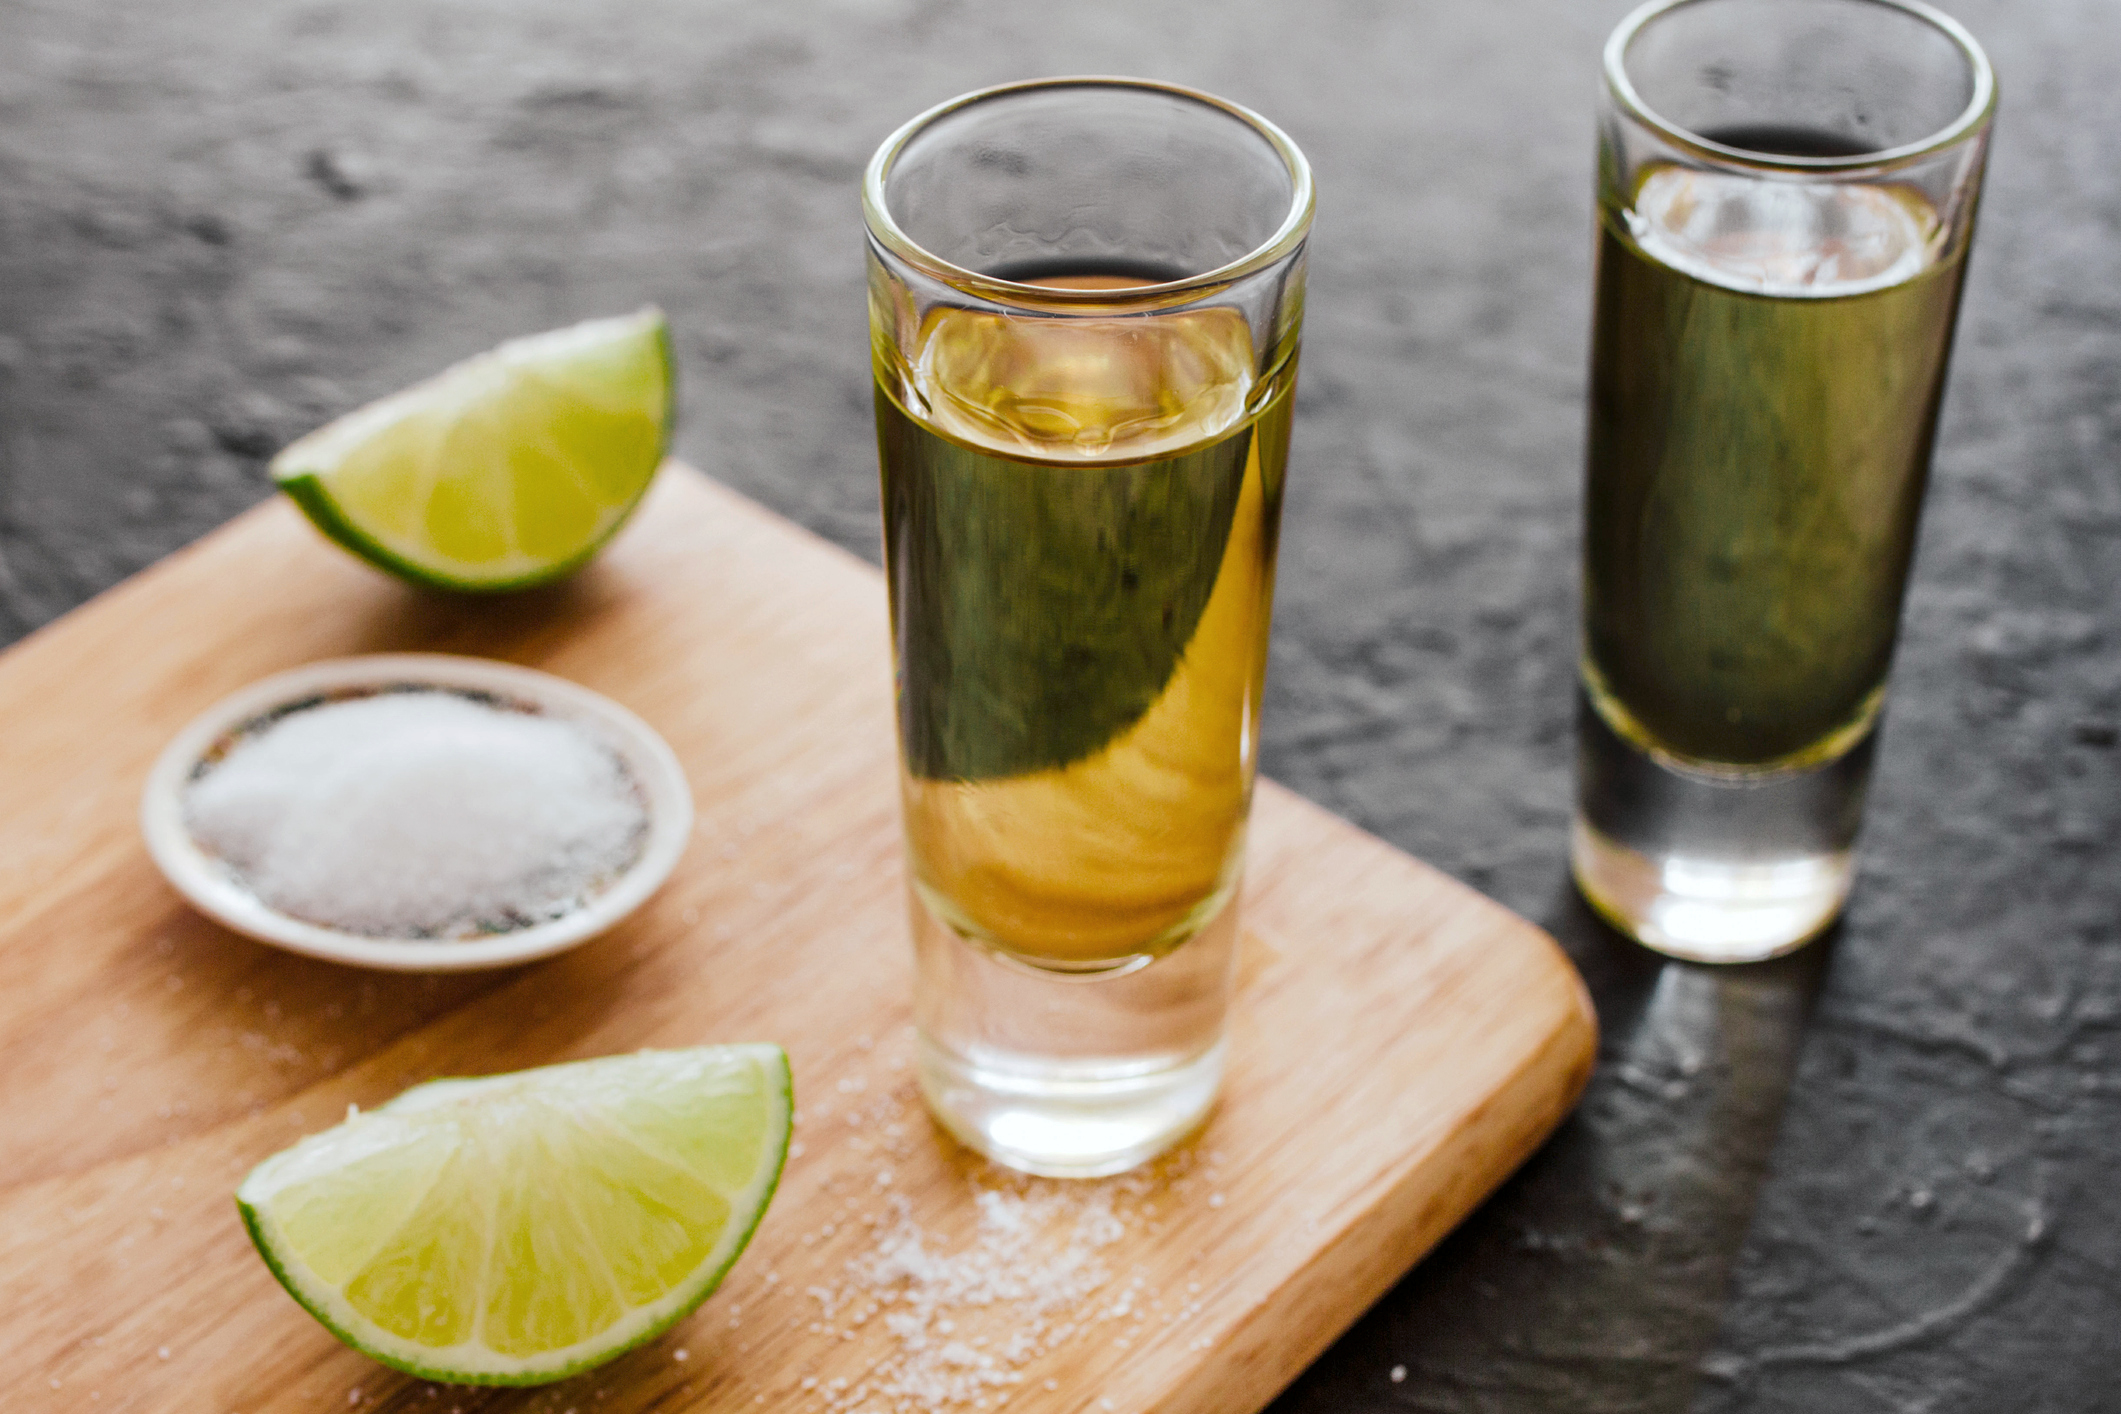 A guide to buy tequila Singapore